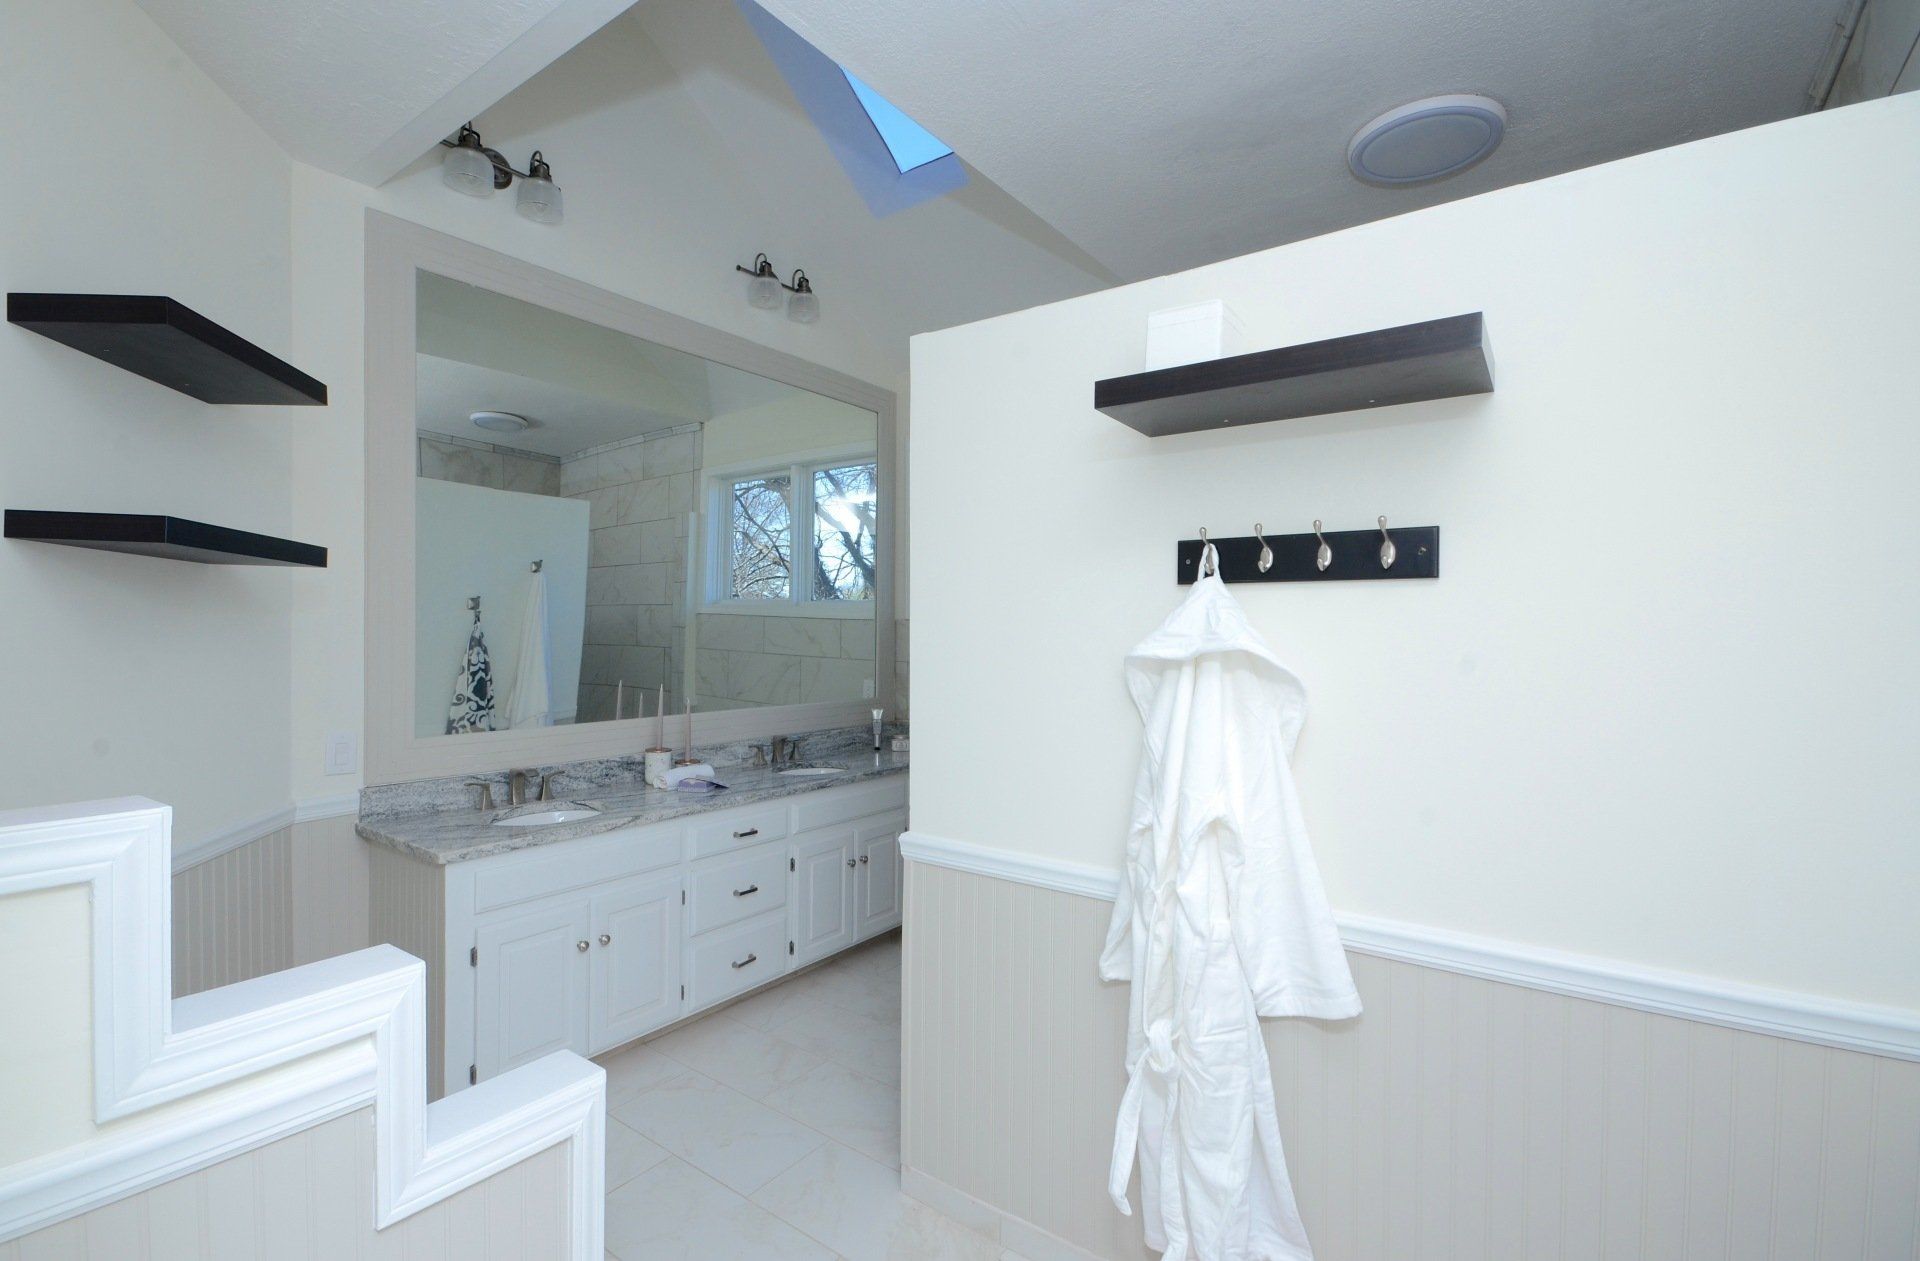 Large home bathroom, cleanly painted in white and beige